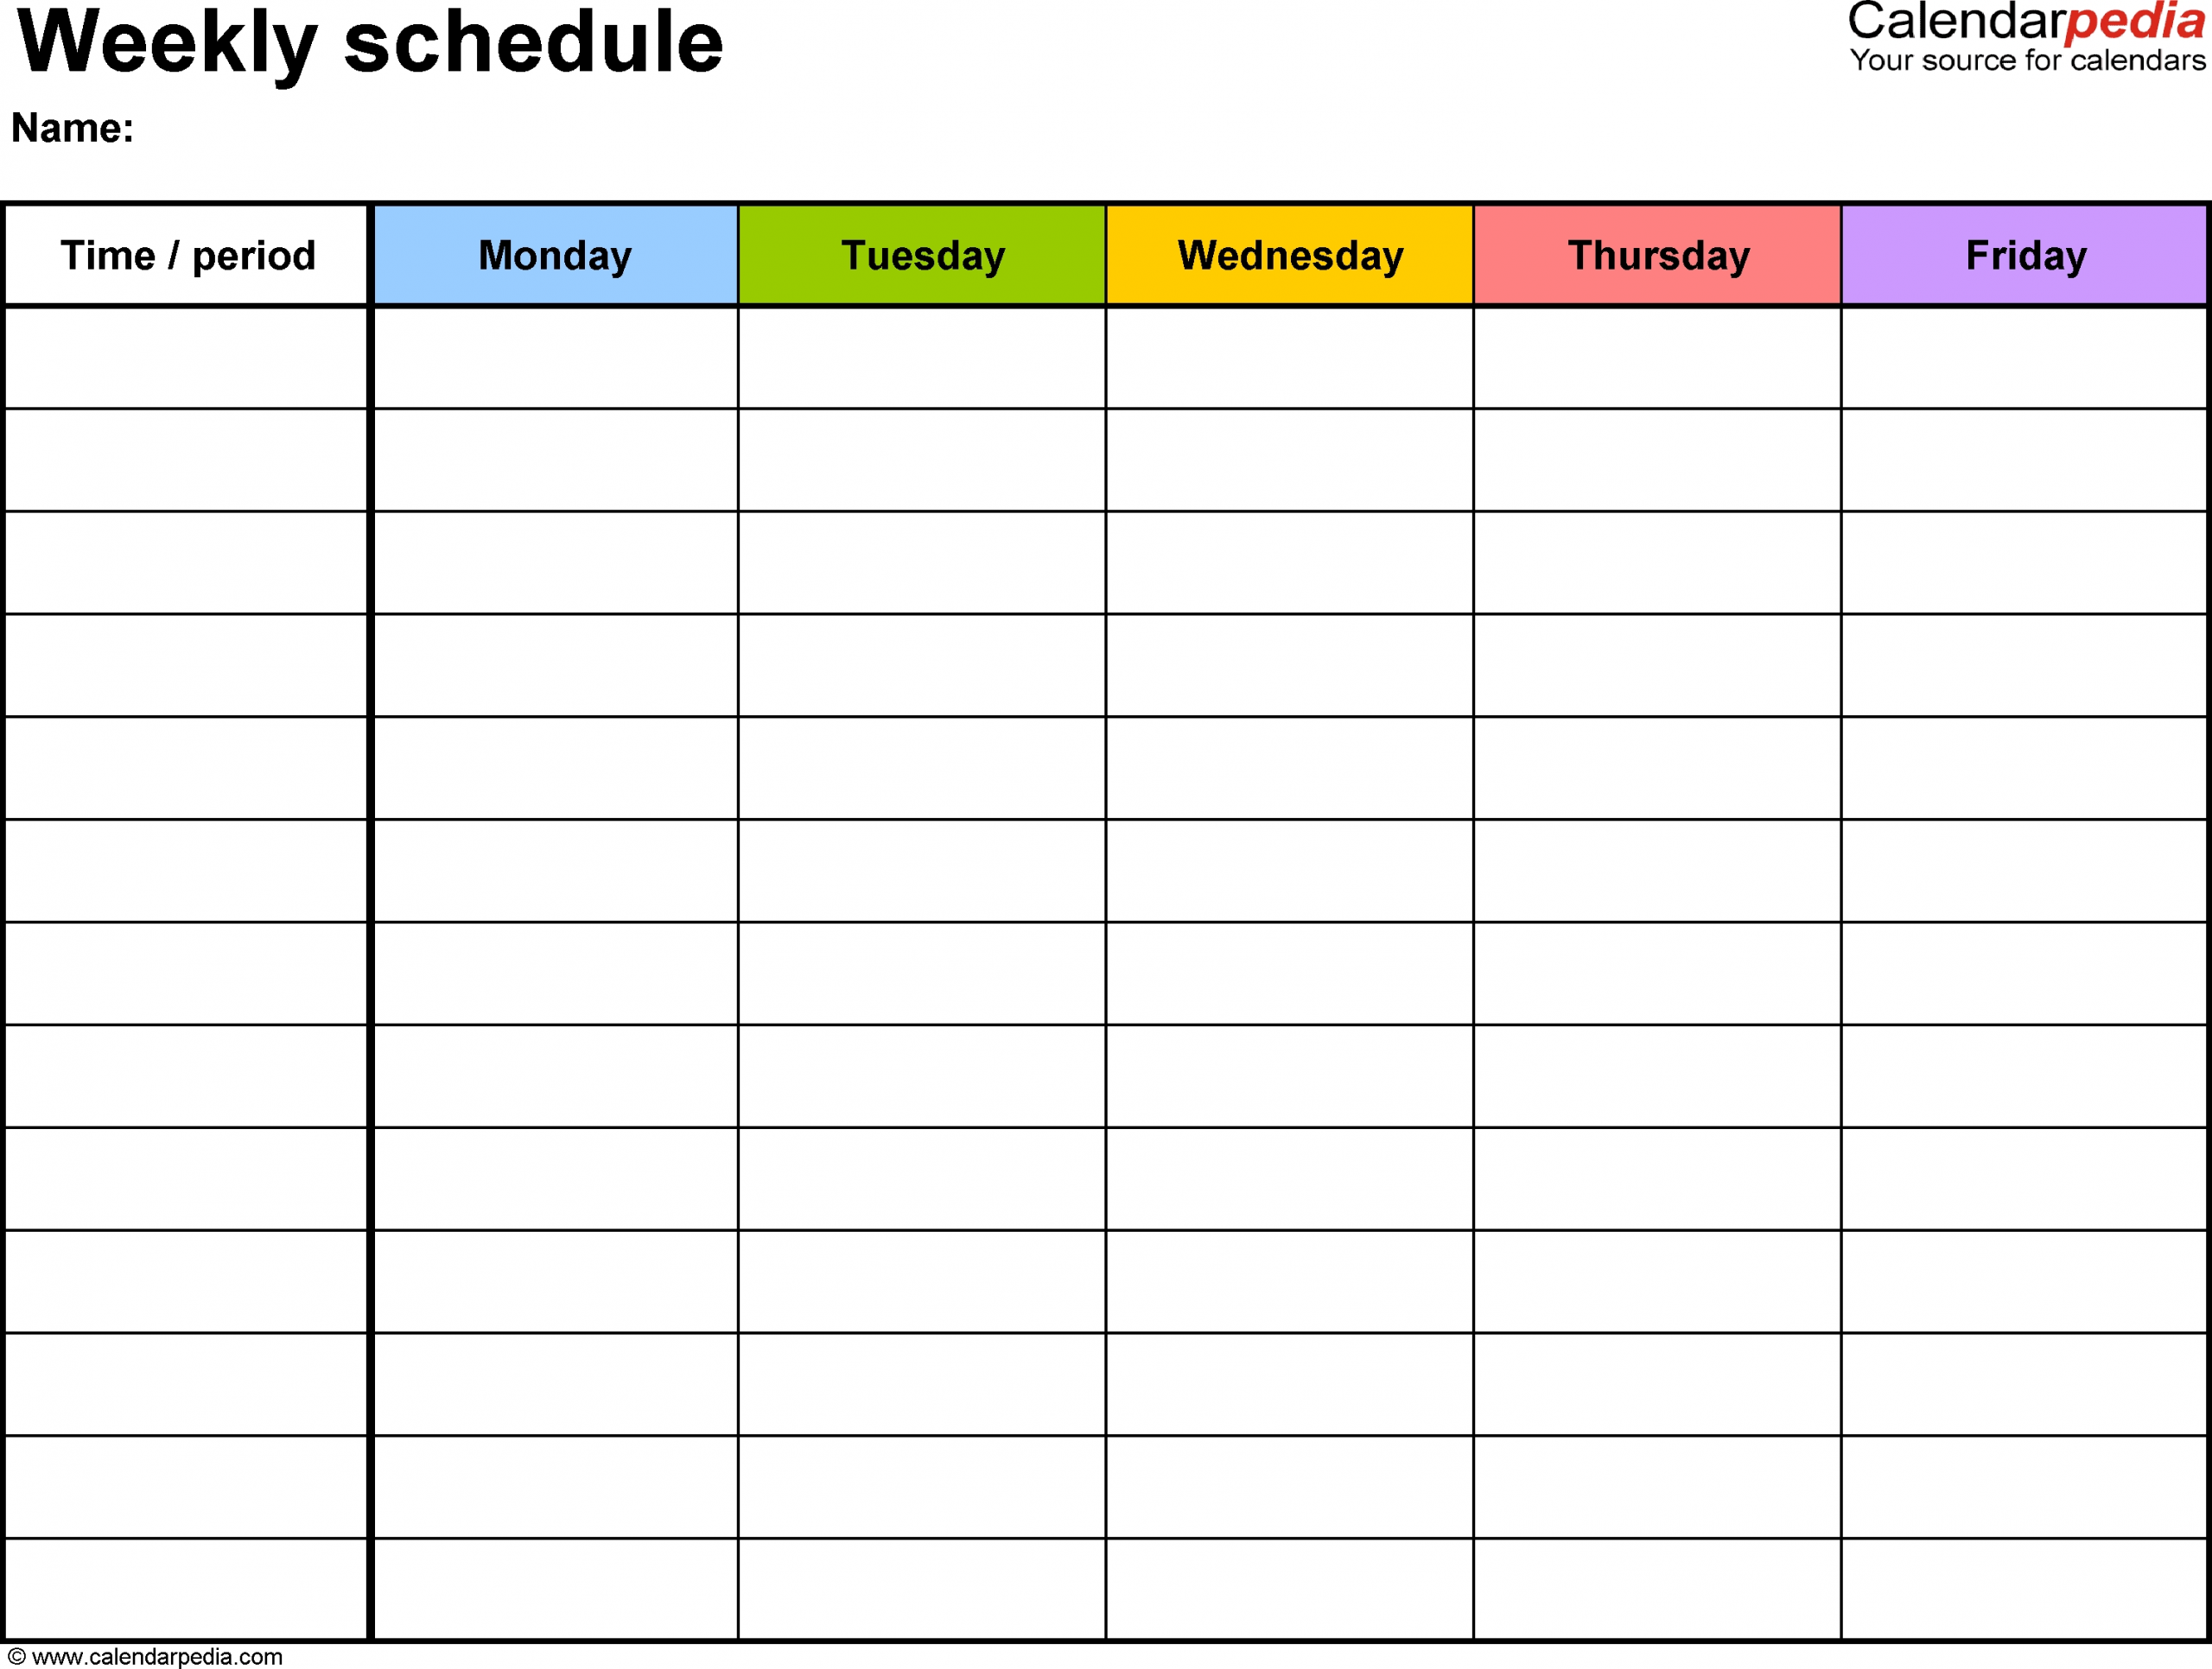 Free Weekly Schedule Templates For Excel - 18 Templates intended for Weekly Schedule Template With Times